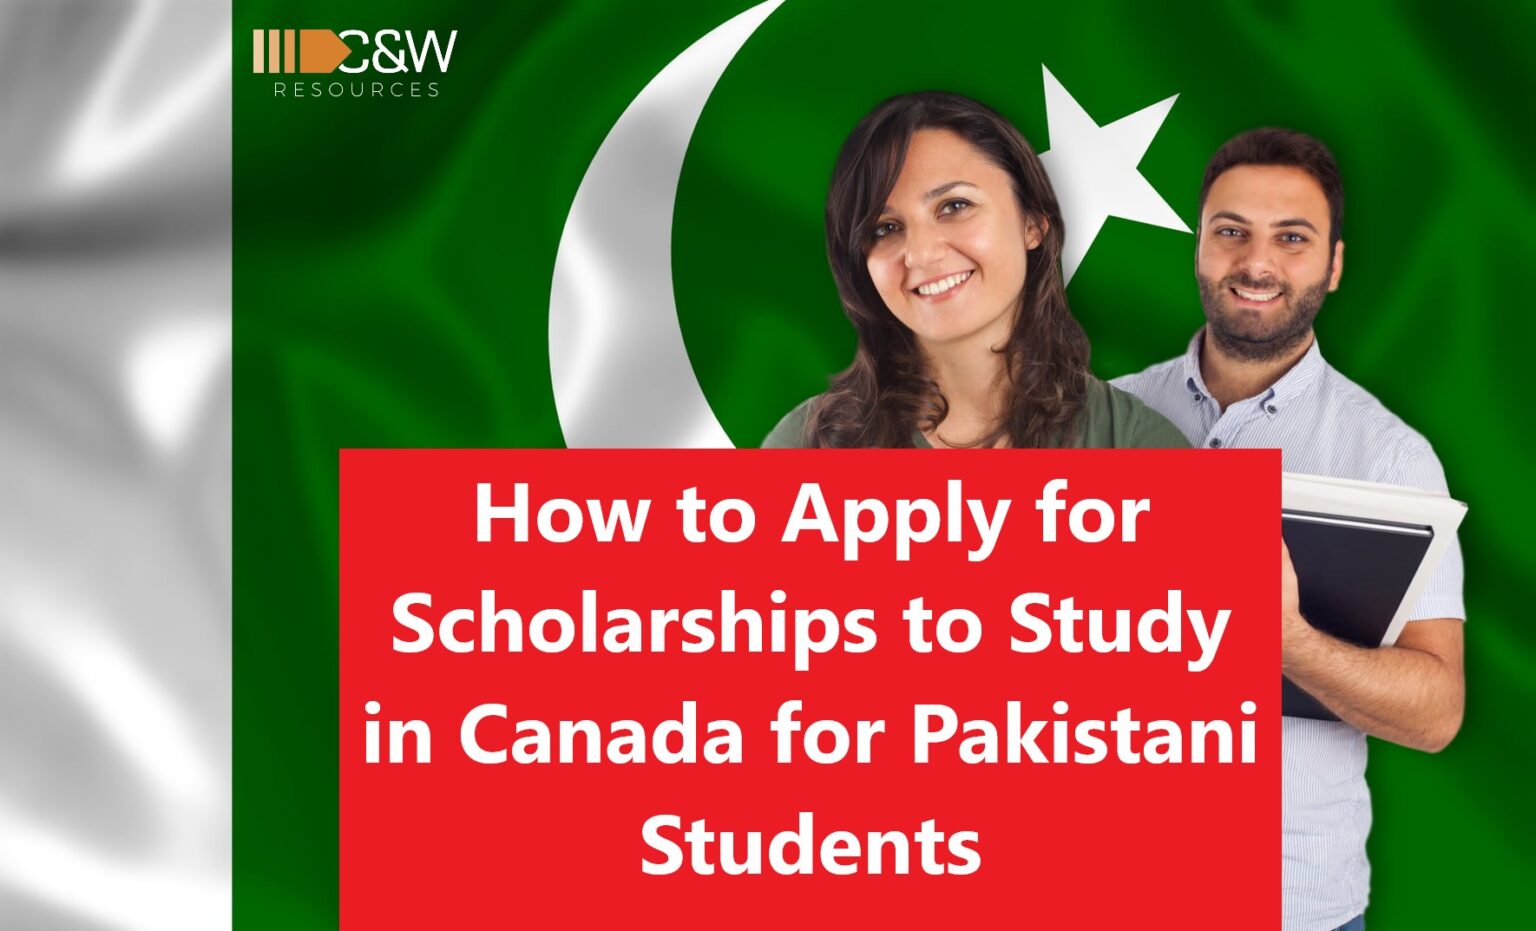 How to Apply for Scholarships to Study in Canada for Pakistani Students - C&W Resources